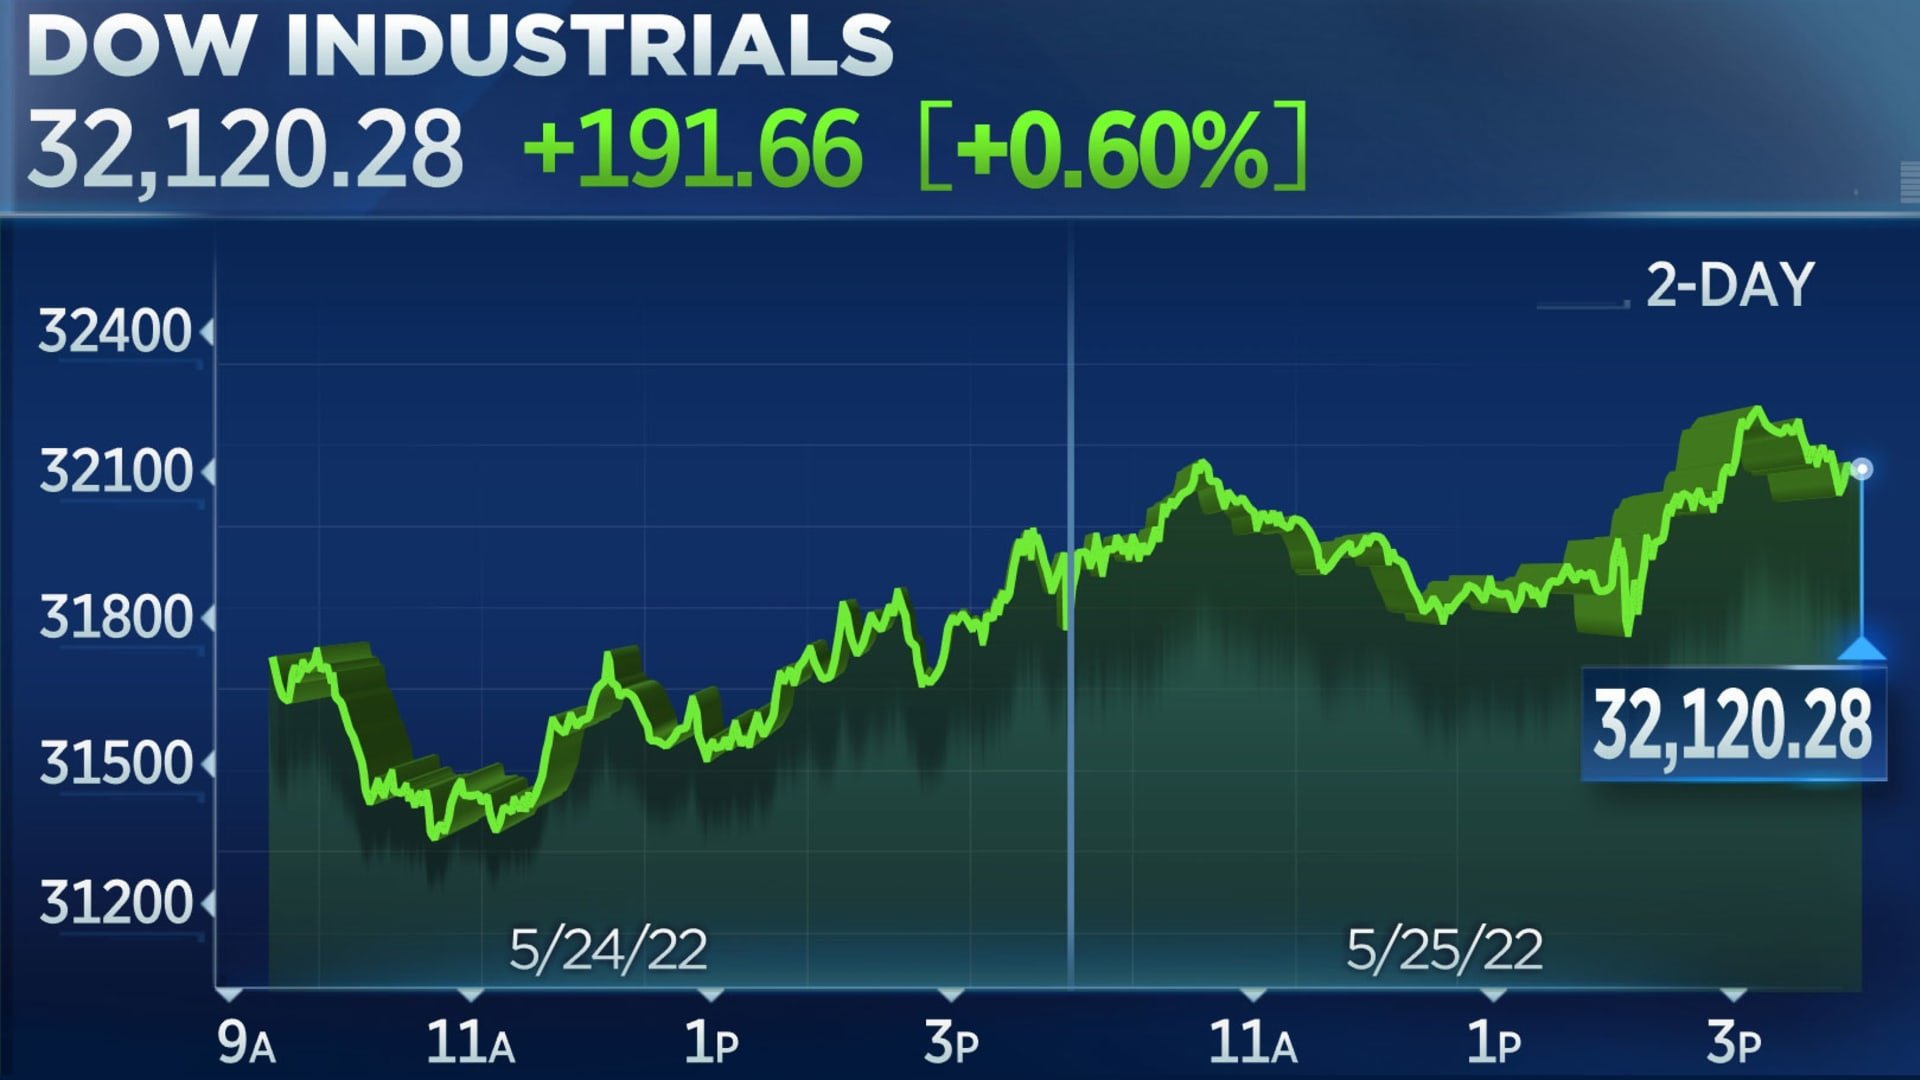 Stocks rise after Fed signals further rate hikes, Dow jumps nearly 200 points